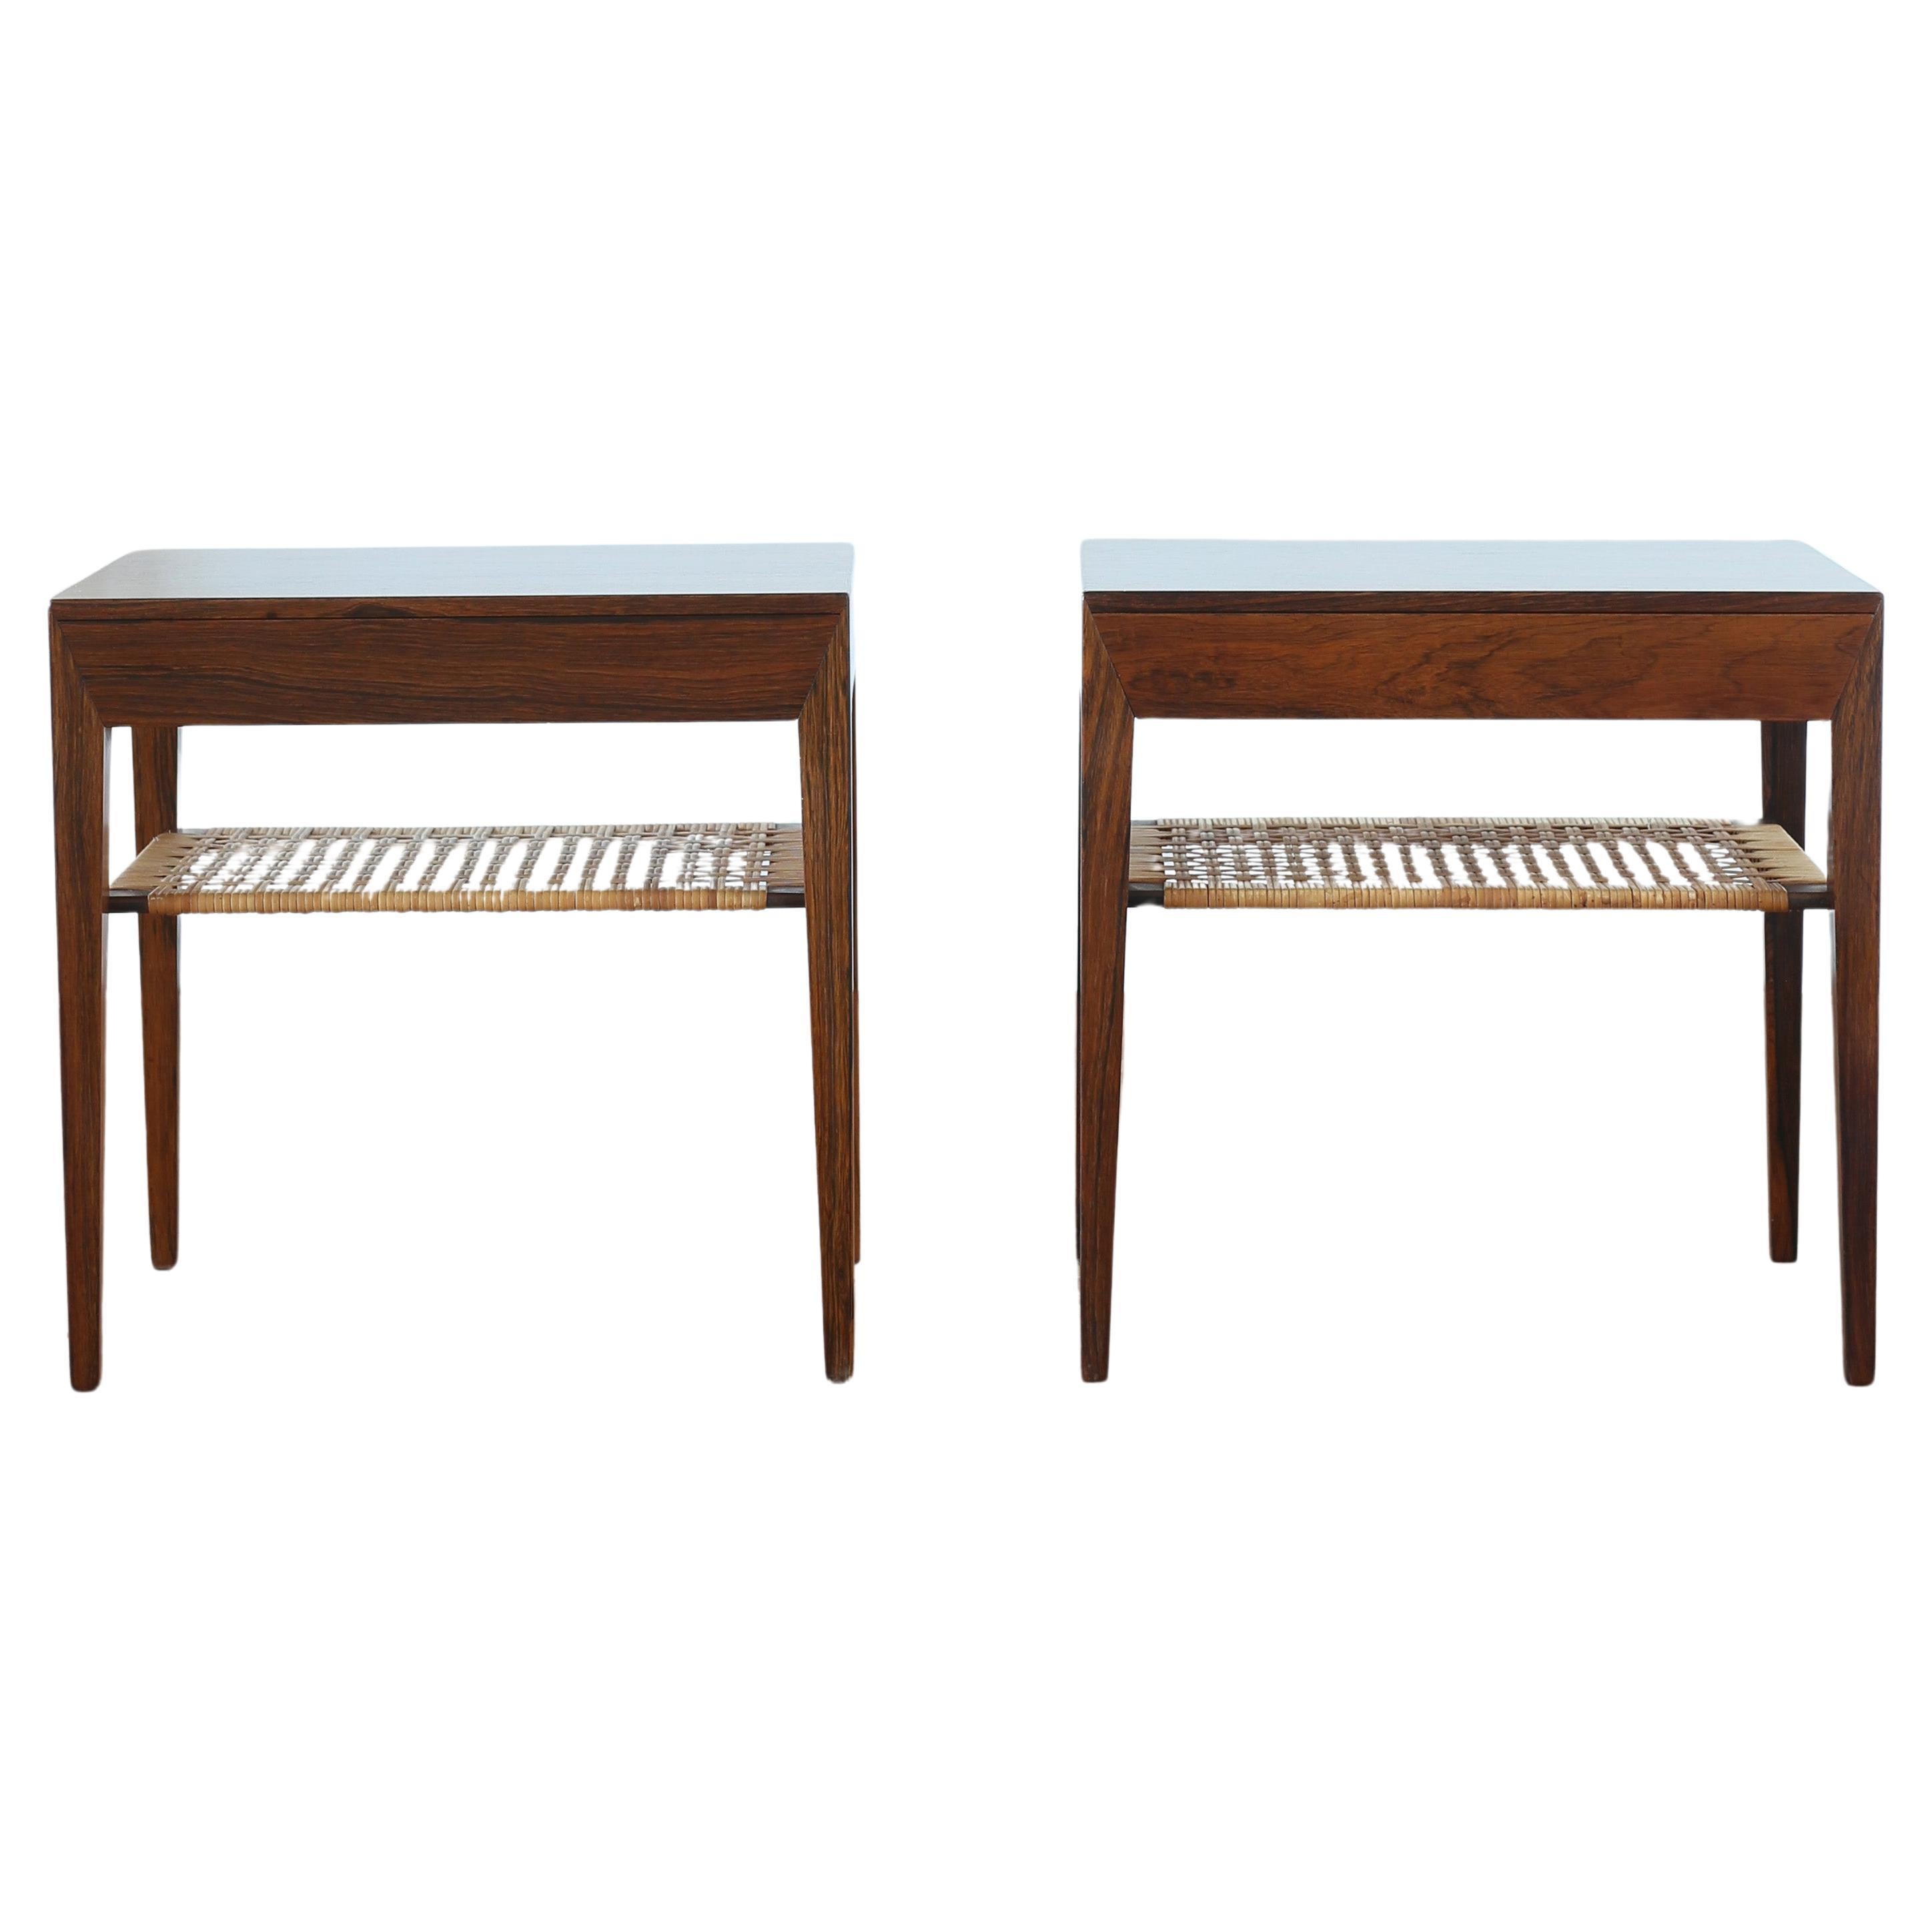 A pair of Severin Hansen side tables in rosewood with cane shelf and drawer. Designed by Severin Hansen 1960s and made at Haslev møbelsnedkeri in Denmark. 
Very fine condition.
Marked by maker. 